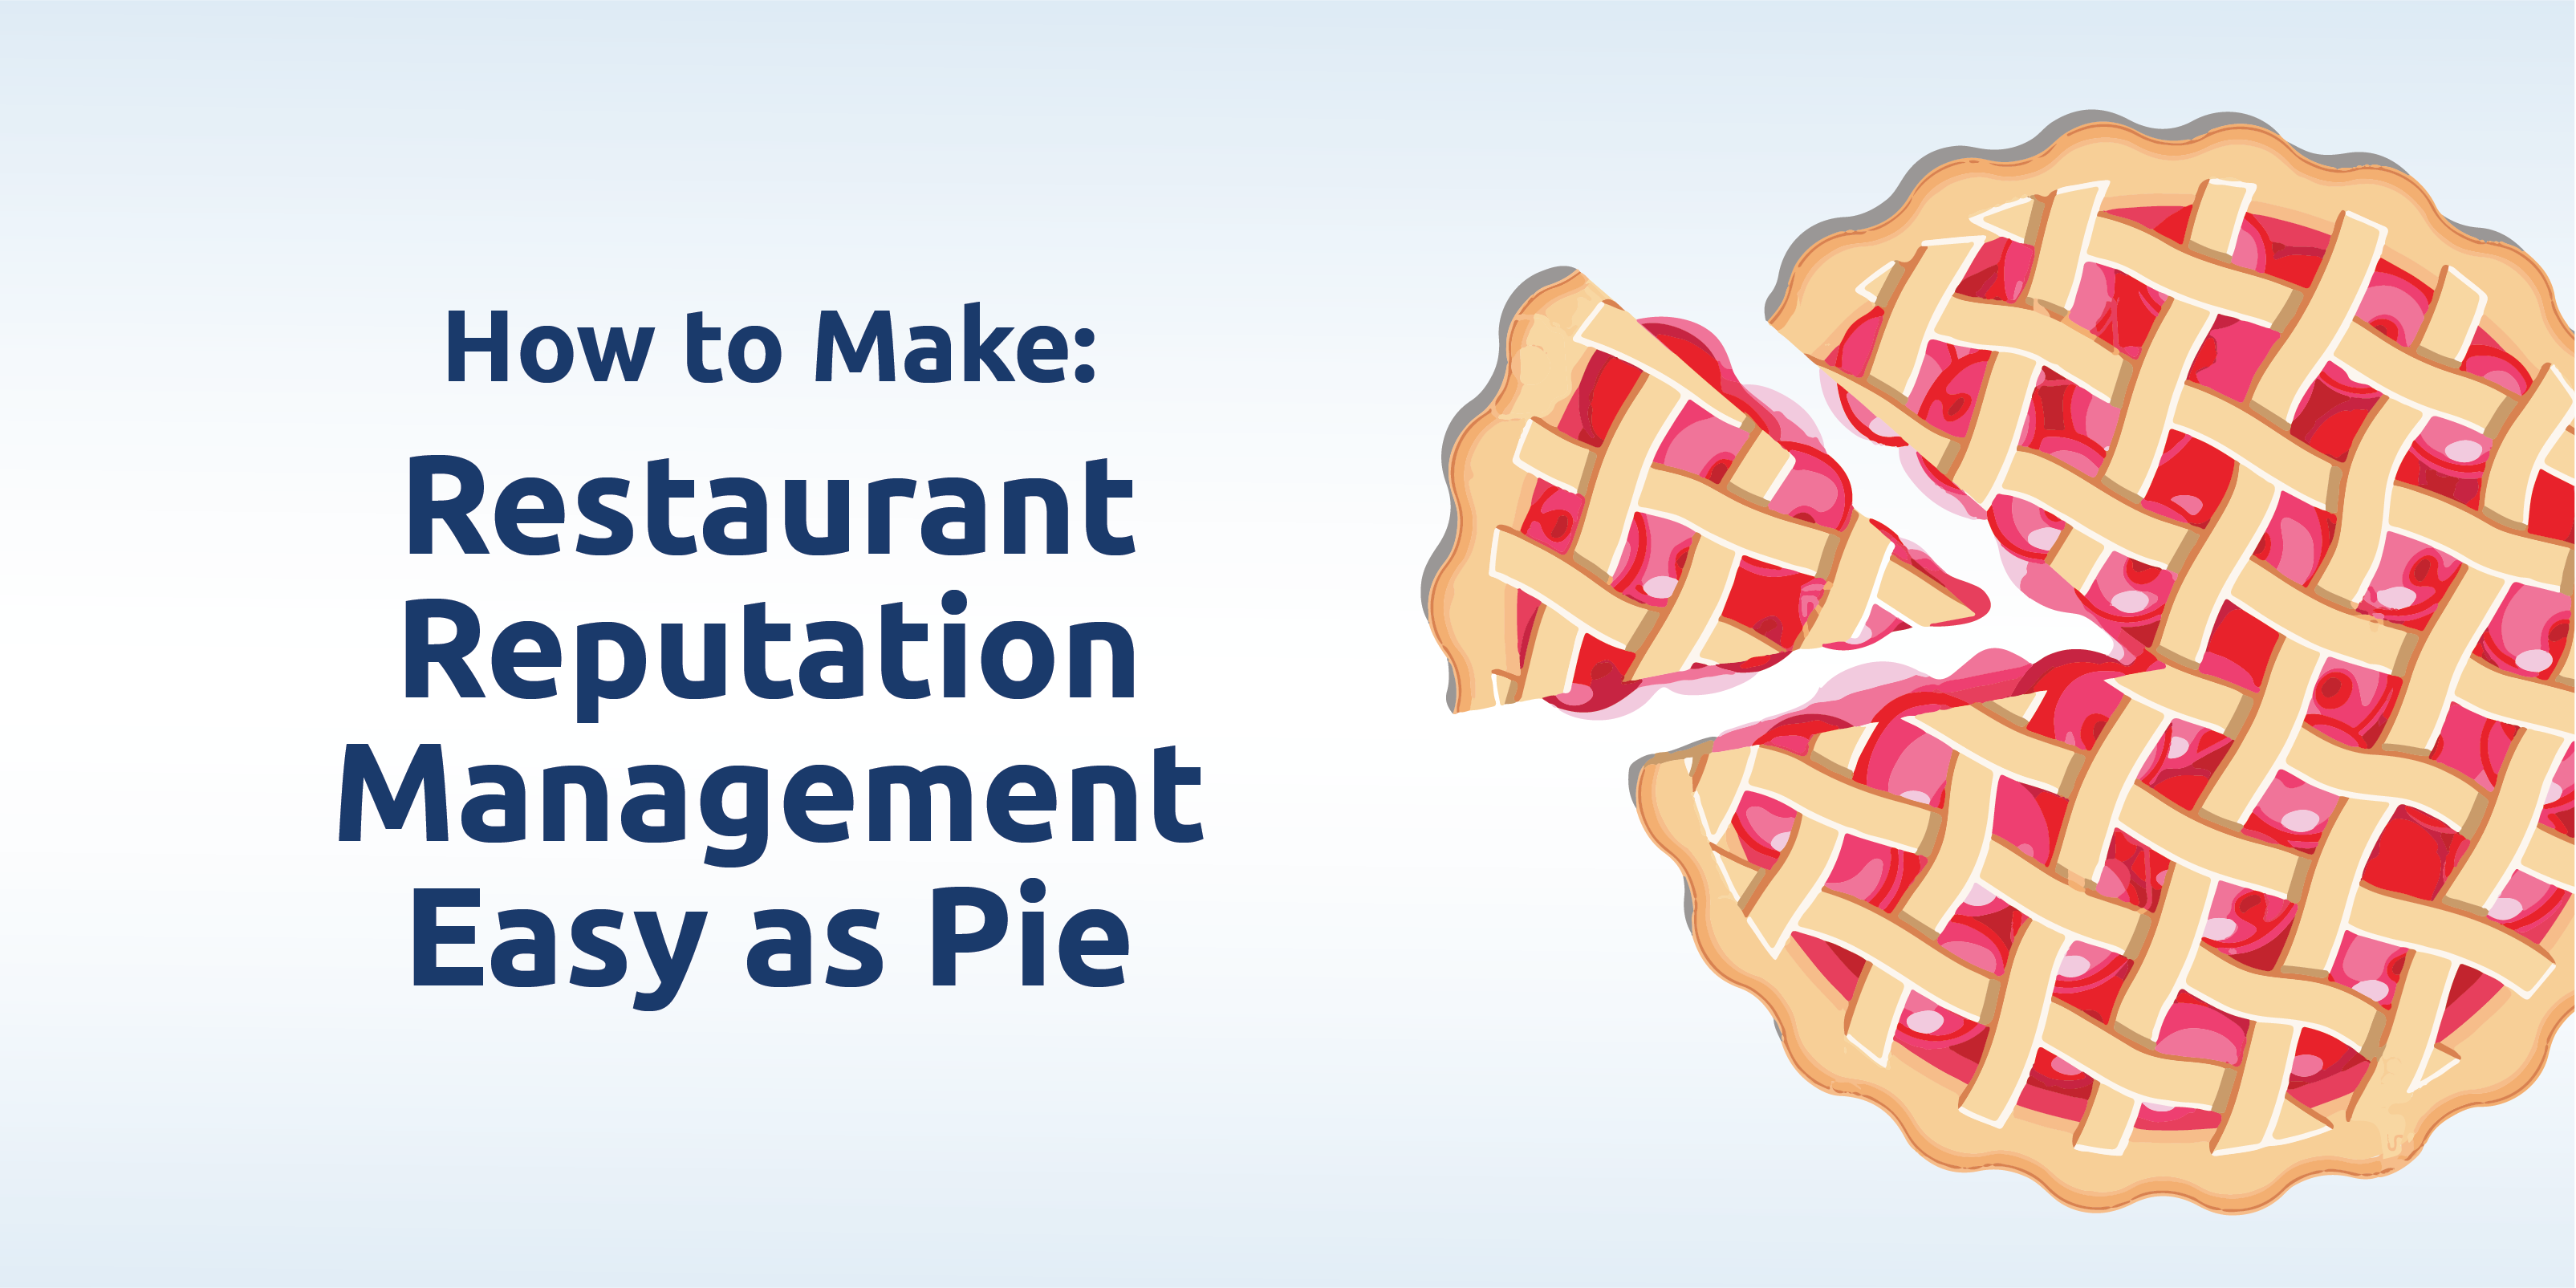 How to Make Restaurant Reputation Management Easy as Pie